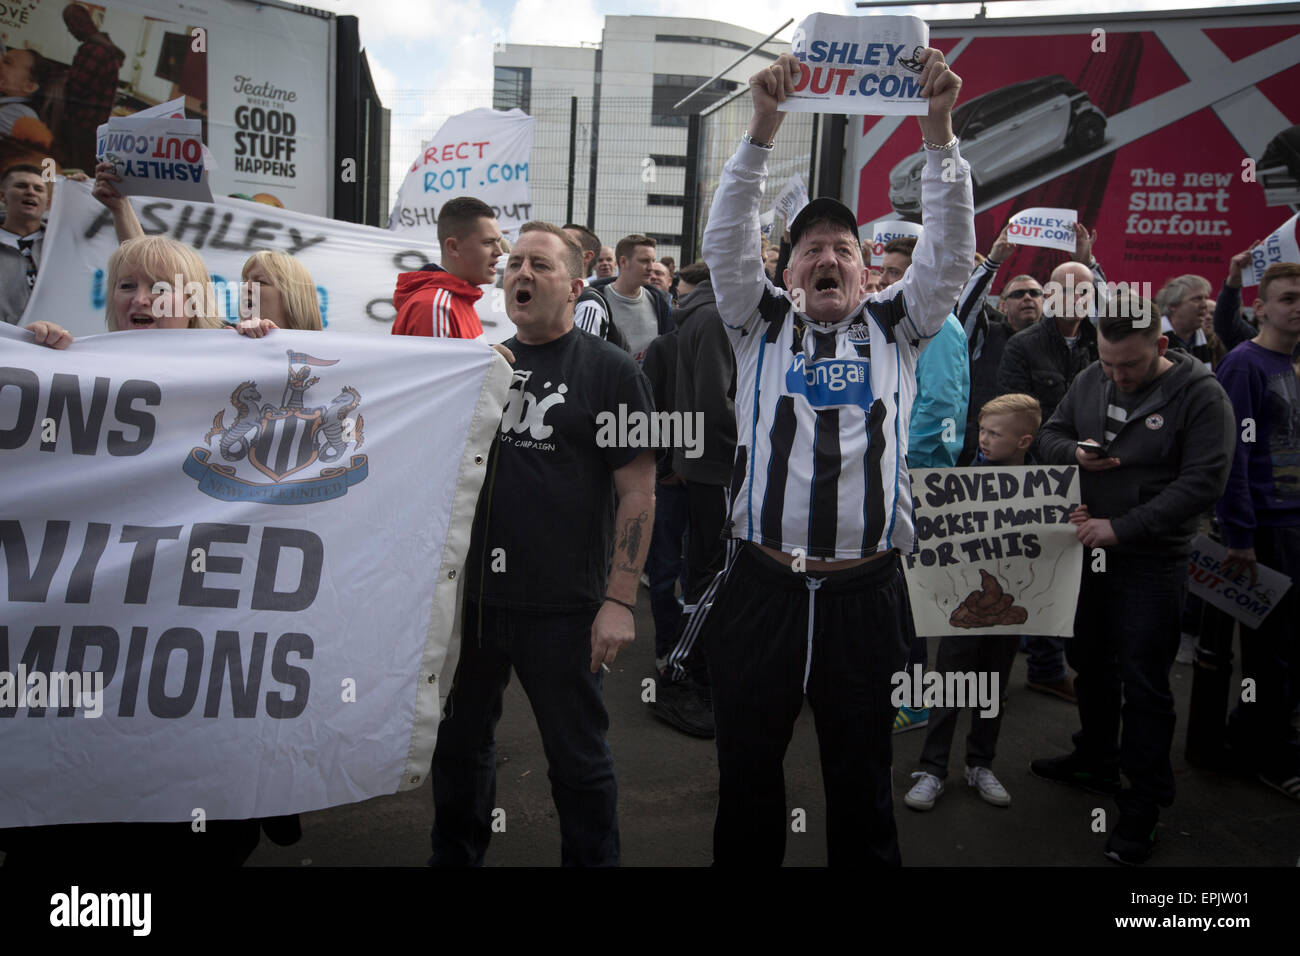 Protesters holding signs and chanting during a demonstration at the Gallowgate end of the stadium before Newcastle United host Tottenham Hotspurs in an English Premier League match at St. James' Park. The match was boycotted by a section of the home support critical of the role of owner Mike Ashley and sponsorship by a payday loan company. The match was won by Spurs by 3-1, watched by 47,427, the lowest league gate of the season at the stadium. Stock Photo